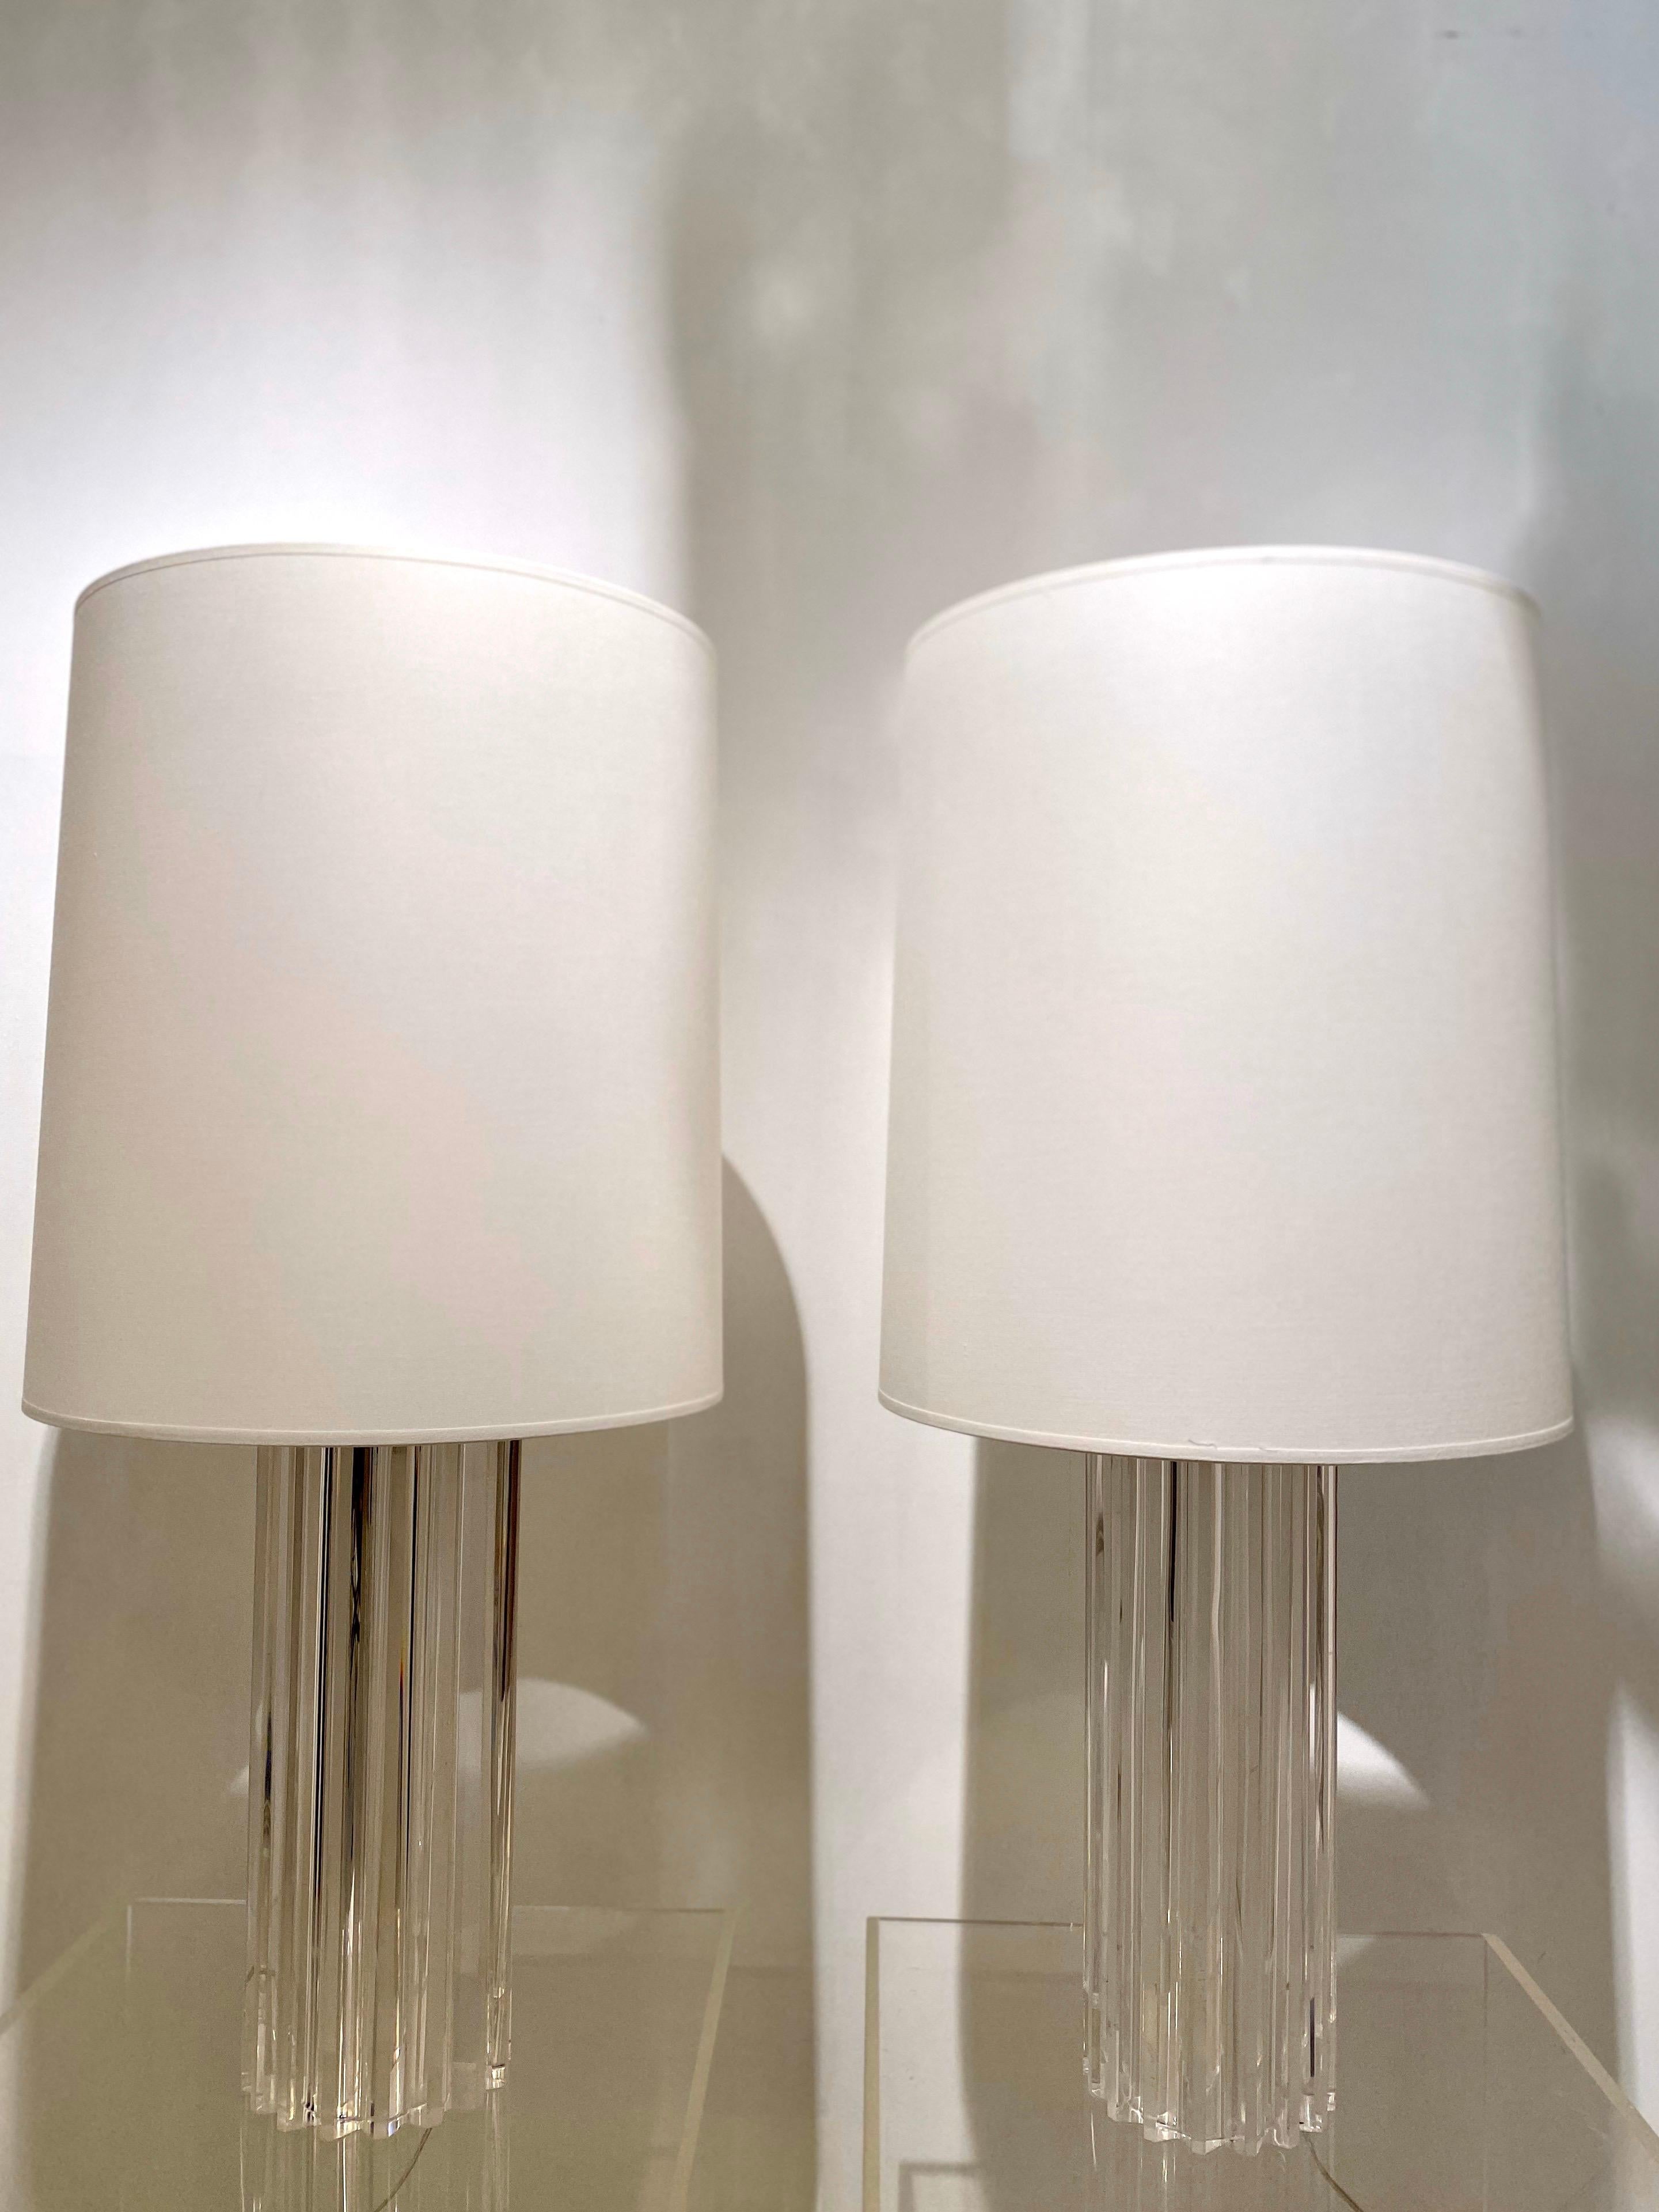 Founded in 1959 by 6 Italian brothers, iGuzzini manufacture has always been very creative working with leading designers and architects to improve the vision of lighting.
This pair of clear plexiglass lamps is full of simplicity and modernity.
A